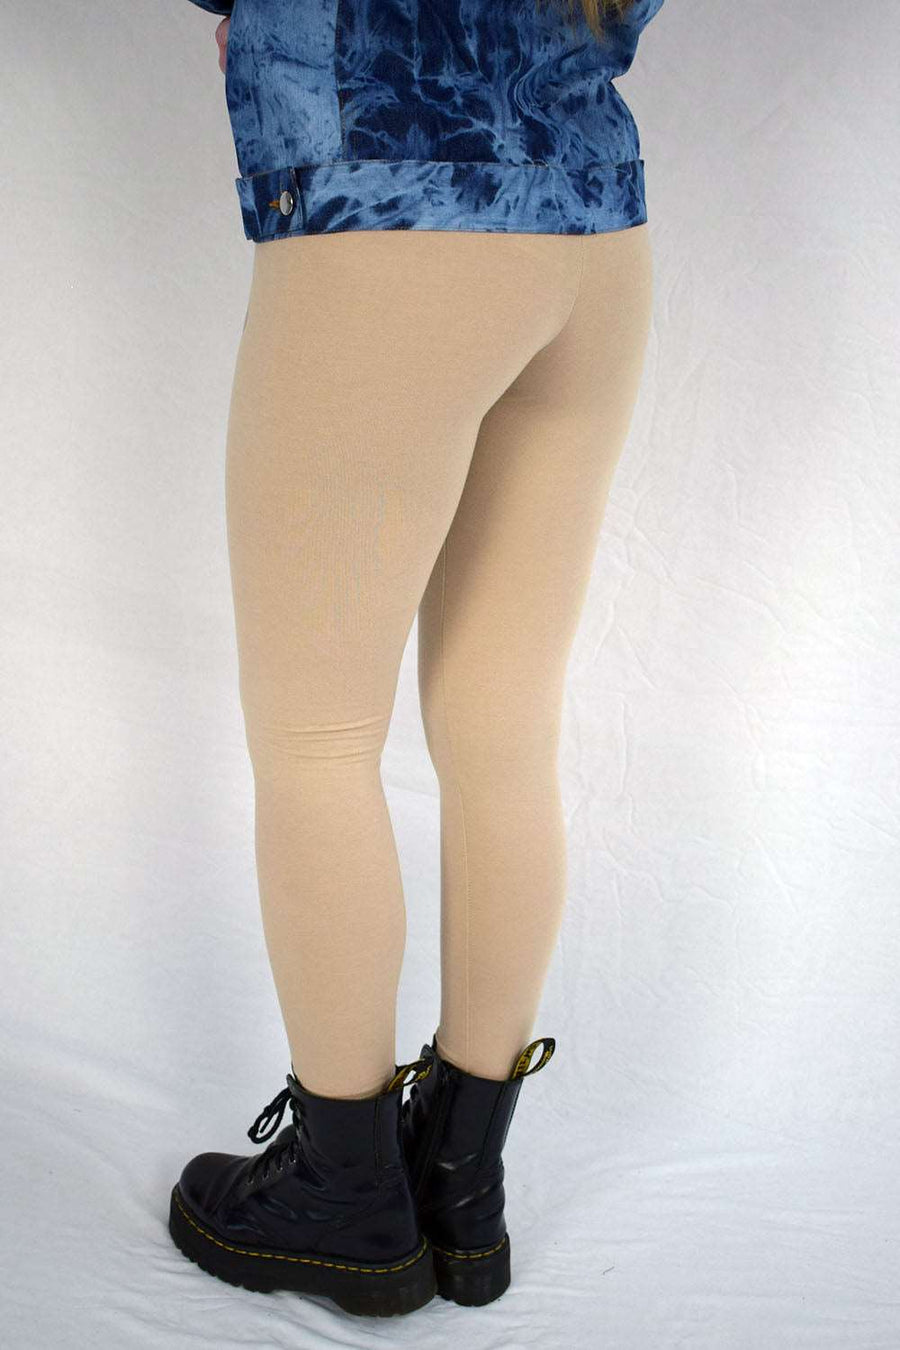 Women Leggings with a Waistband Designed for Tummy Control!